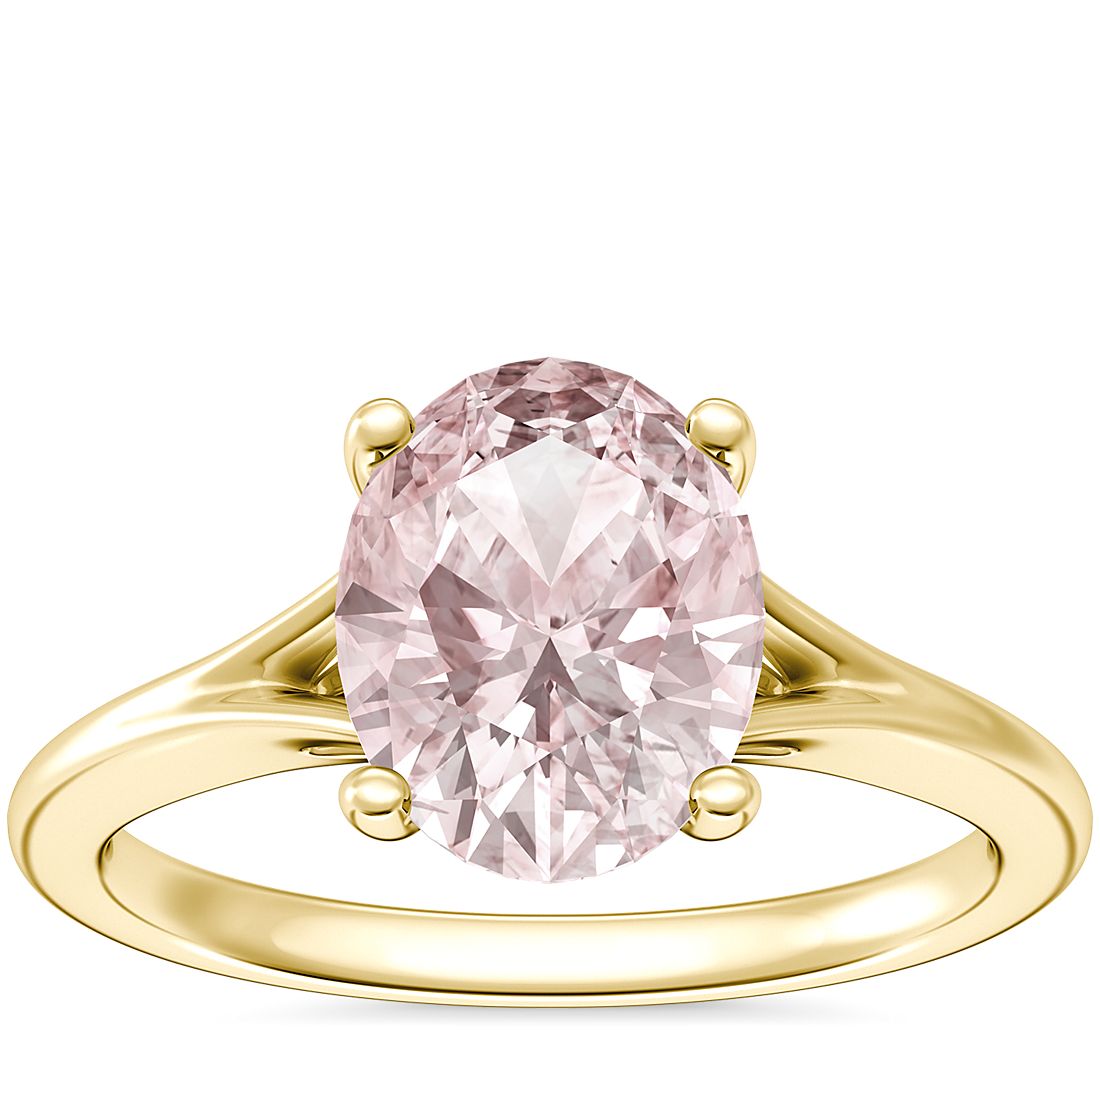 Petite Split Shank Solitaire Engagement Ring with Oval Morganite in 18k Yellow Gold (9x7mm)